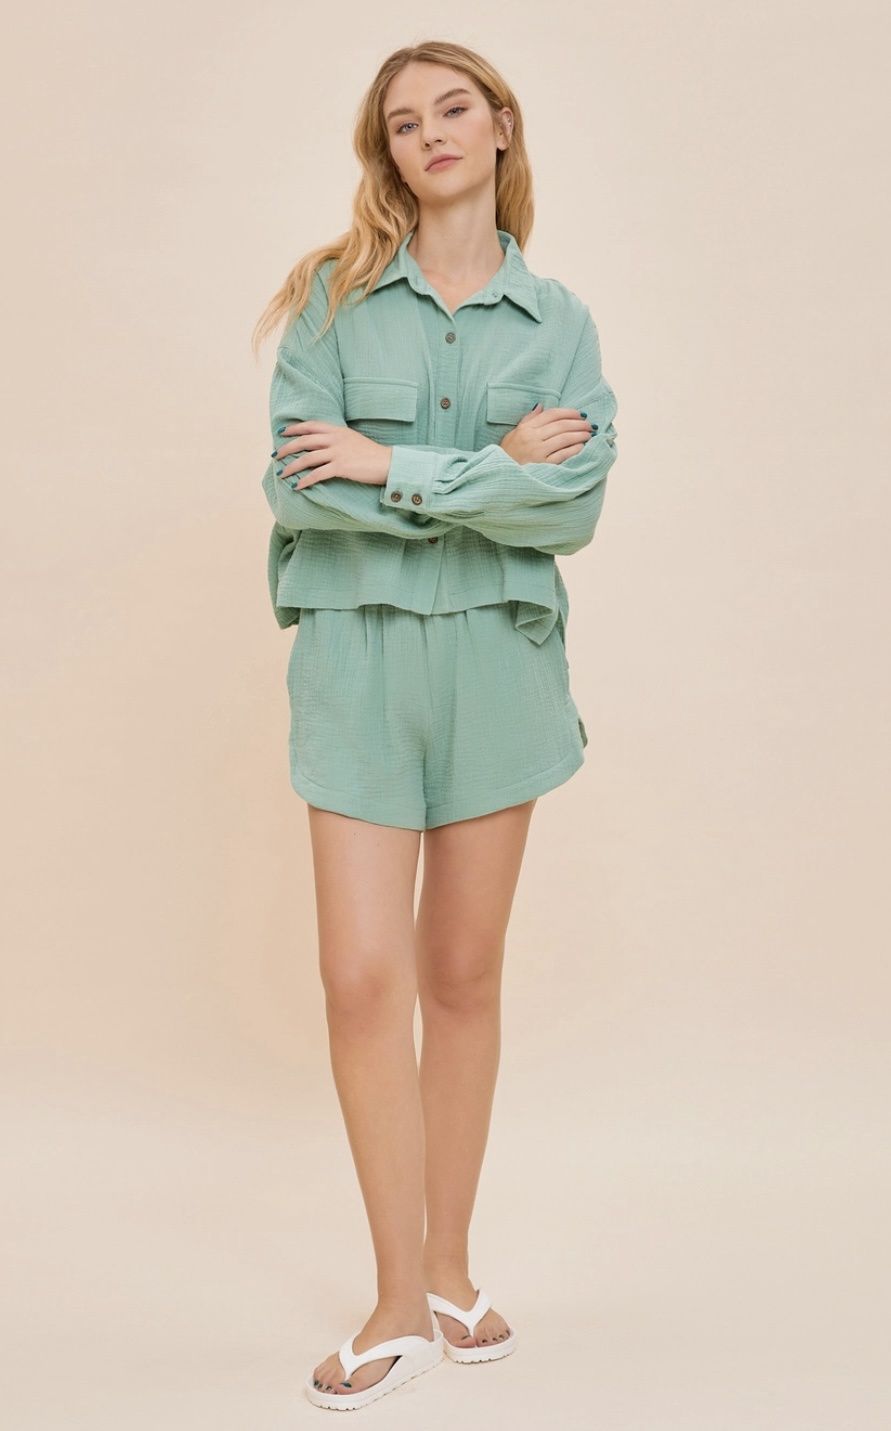 S22549 Mustard Seed ls two pocket button up collared 100% cotton top, color: green, Size: S